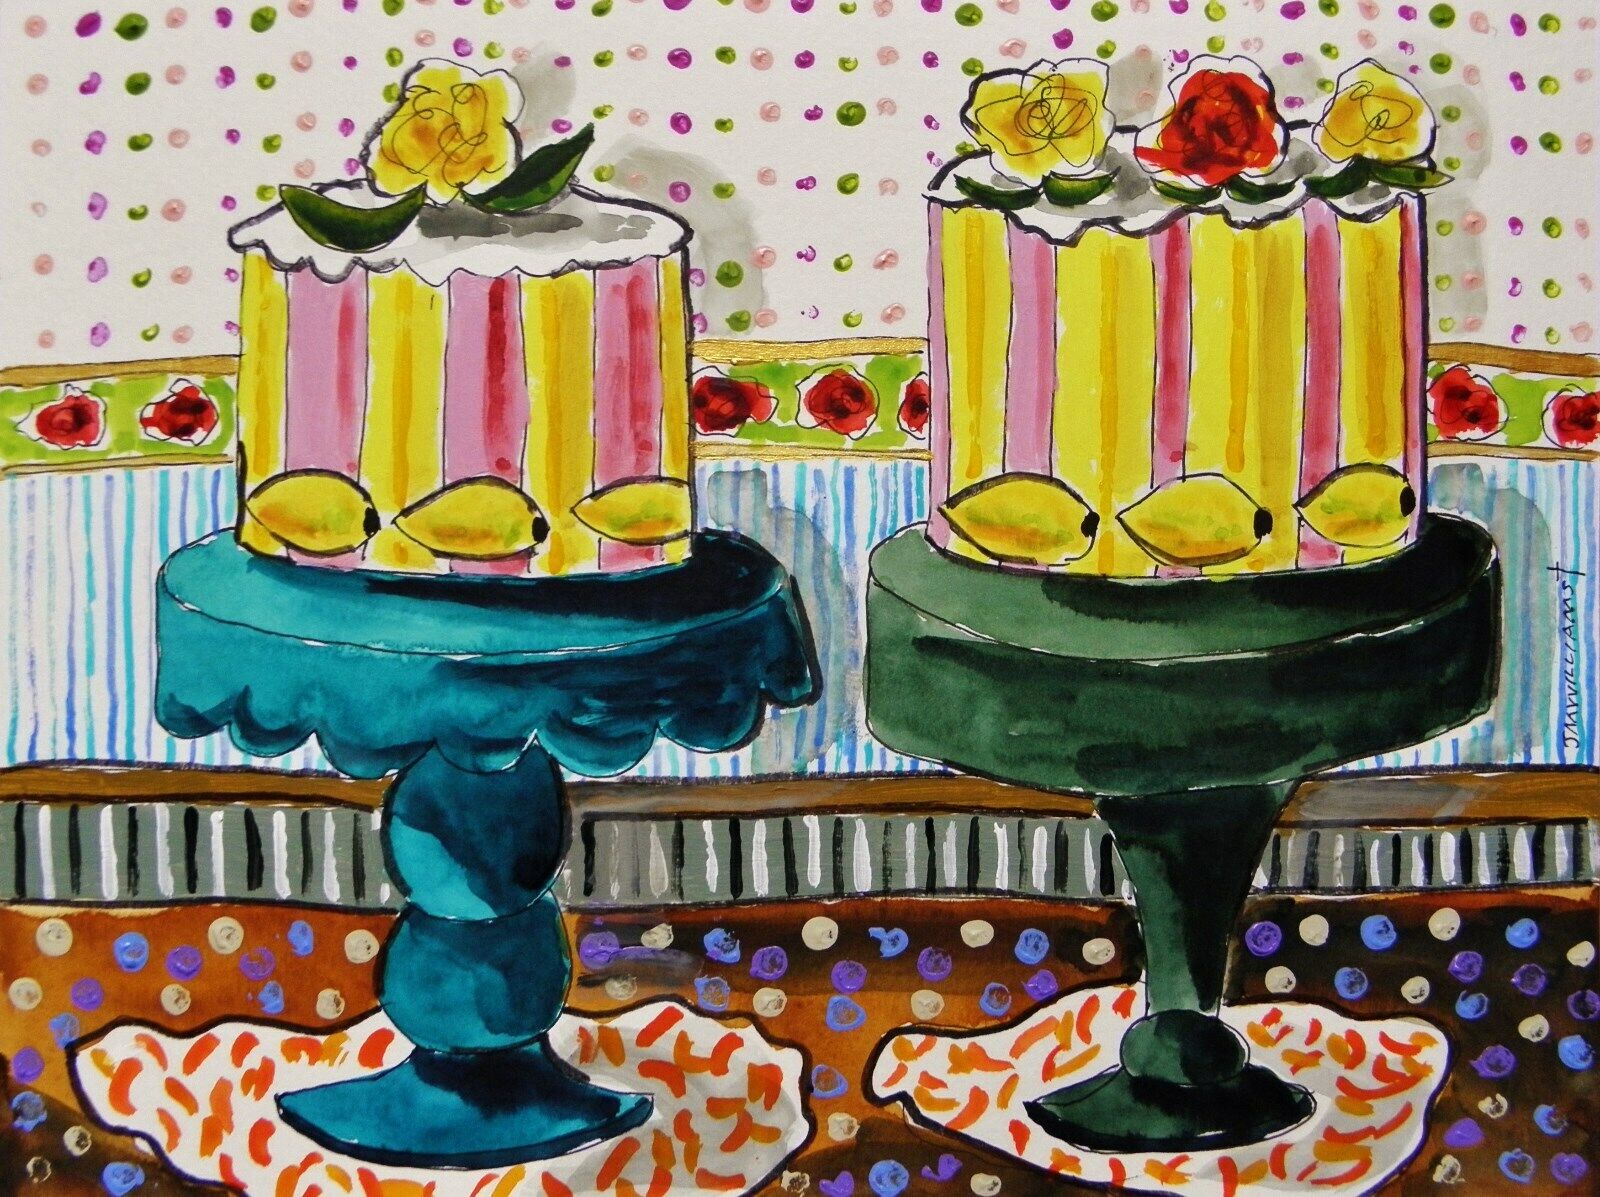 Original Bakery Sketches Cakes Food Watercolor Impressionism